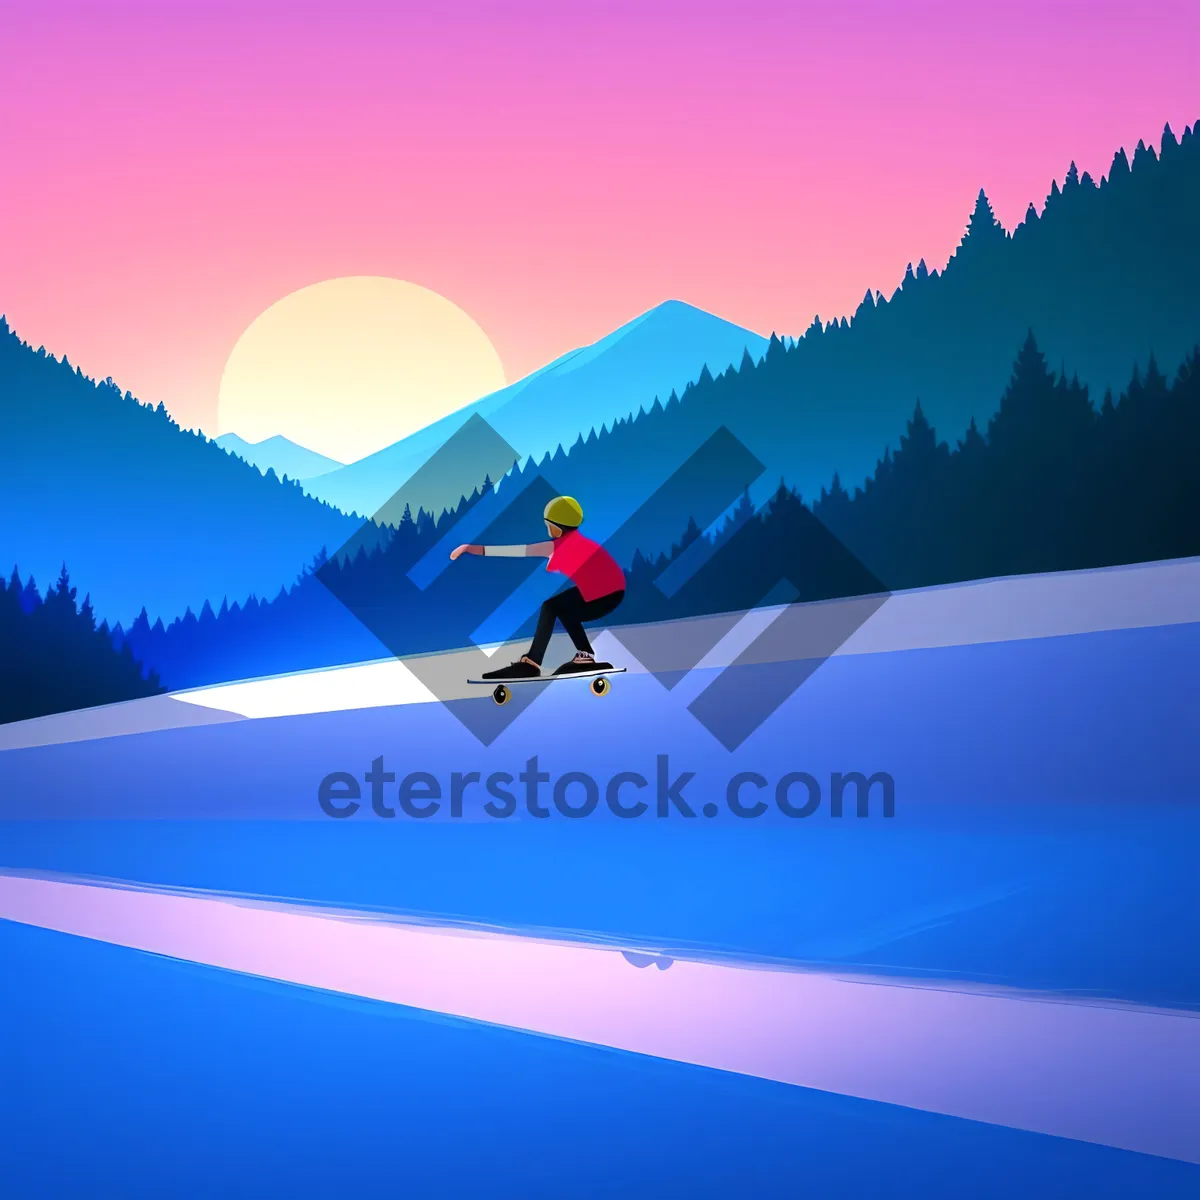 Picture of Majestic Winter Wonderland: Snowy Mountain Slope with Skier.